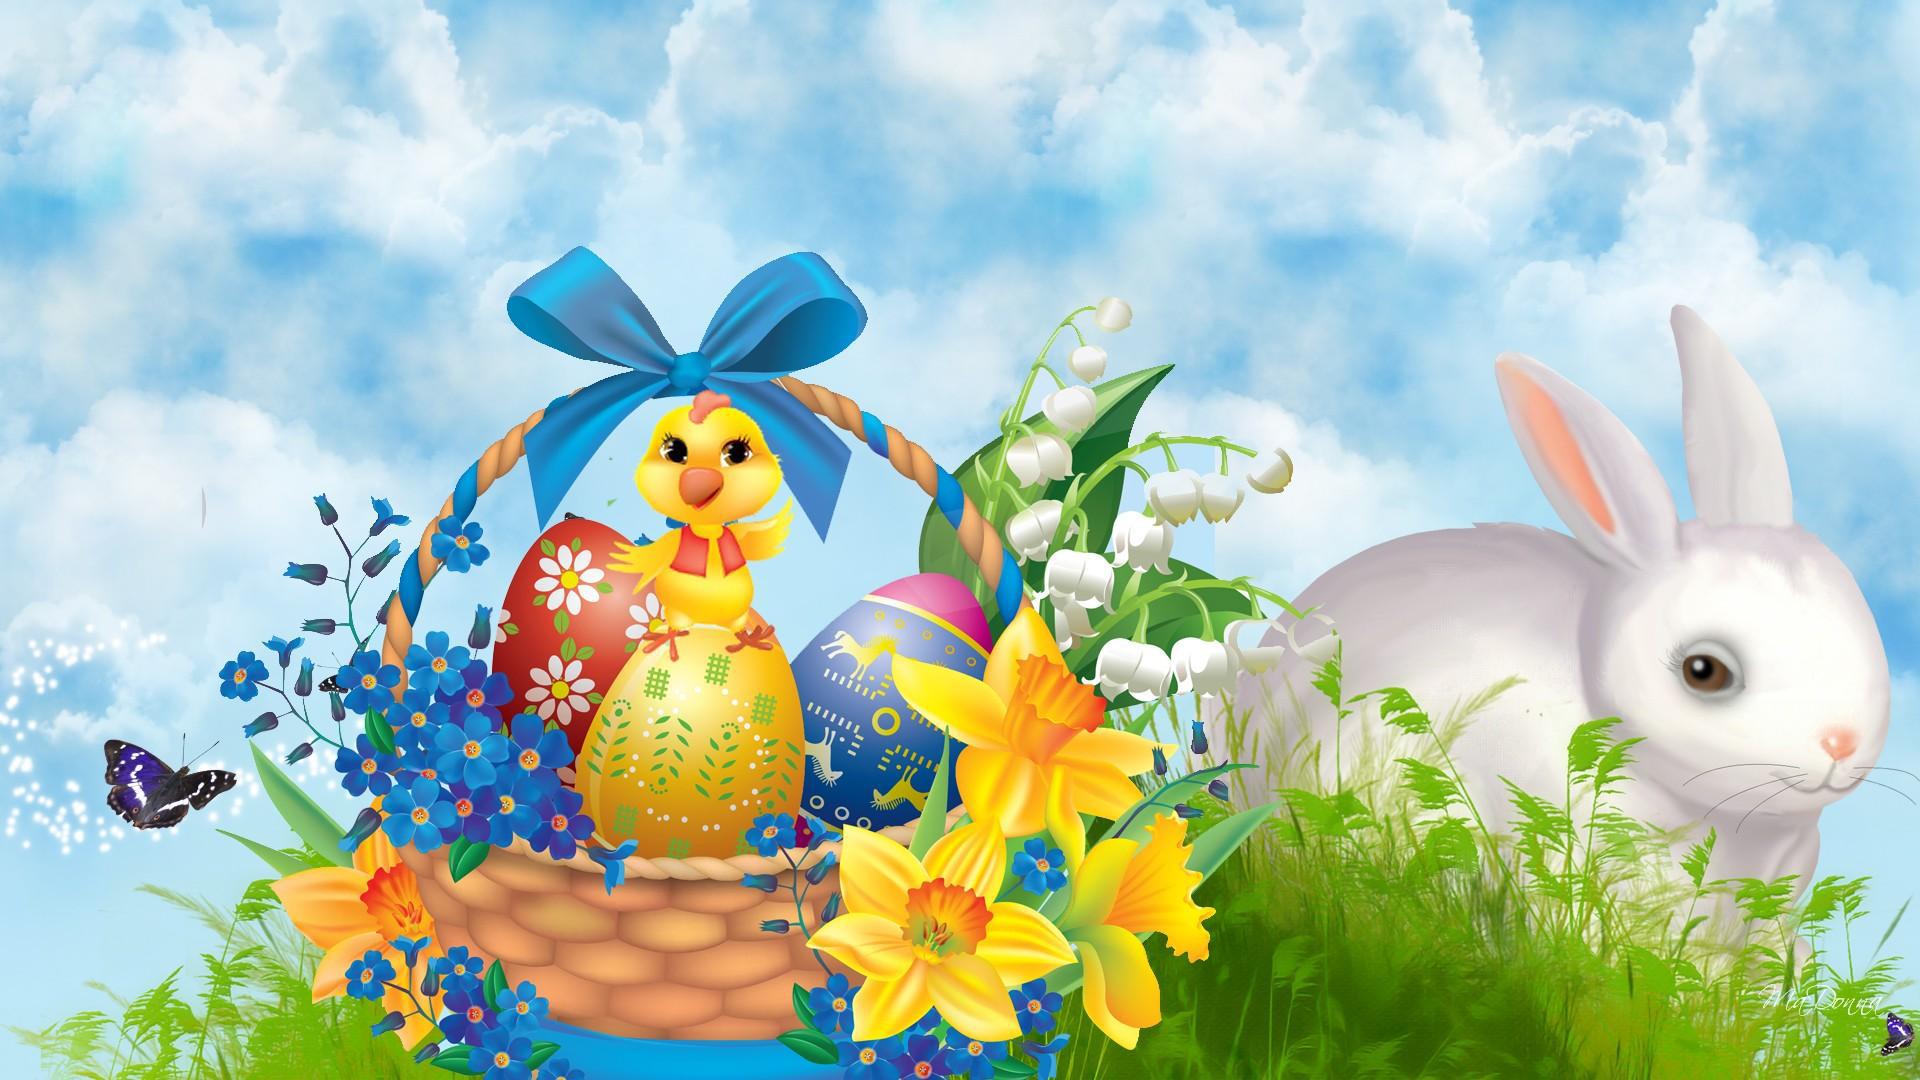 Baby Easter Bunny Wallpaper Free Baby Easter Bunny Background